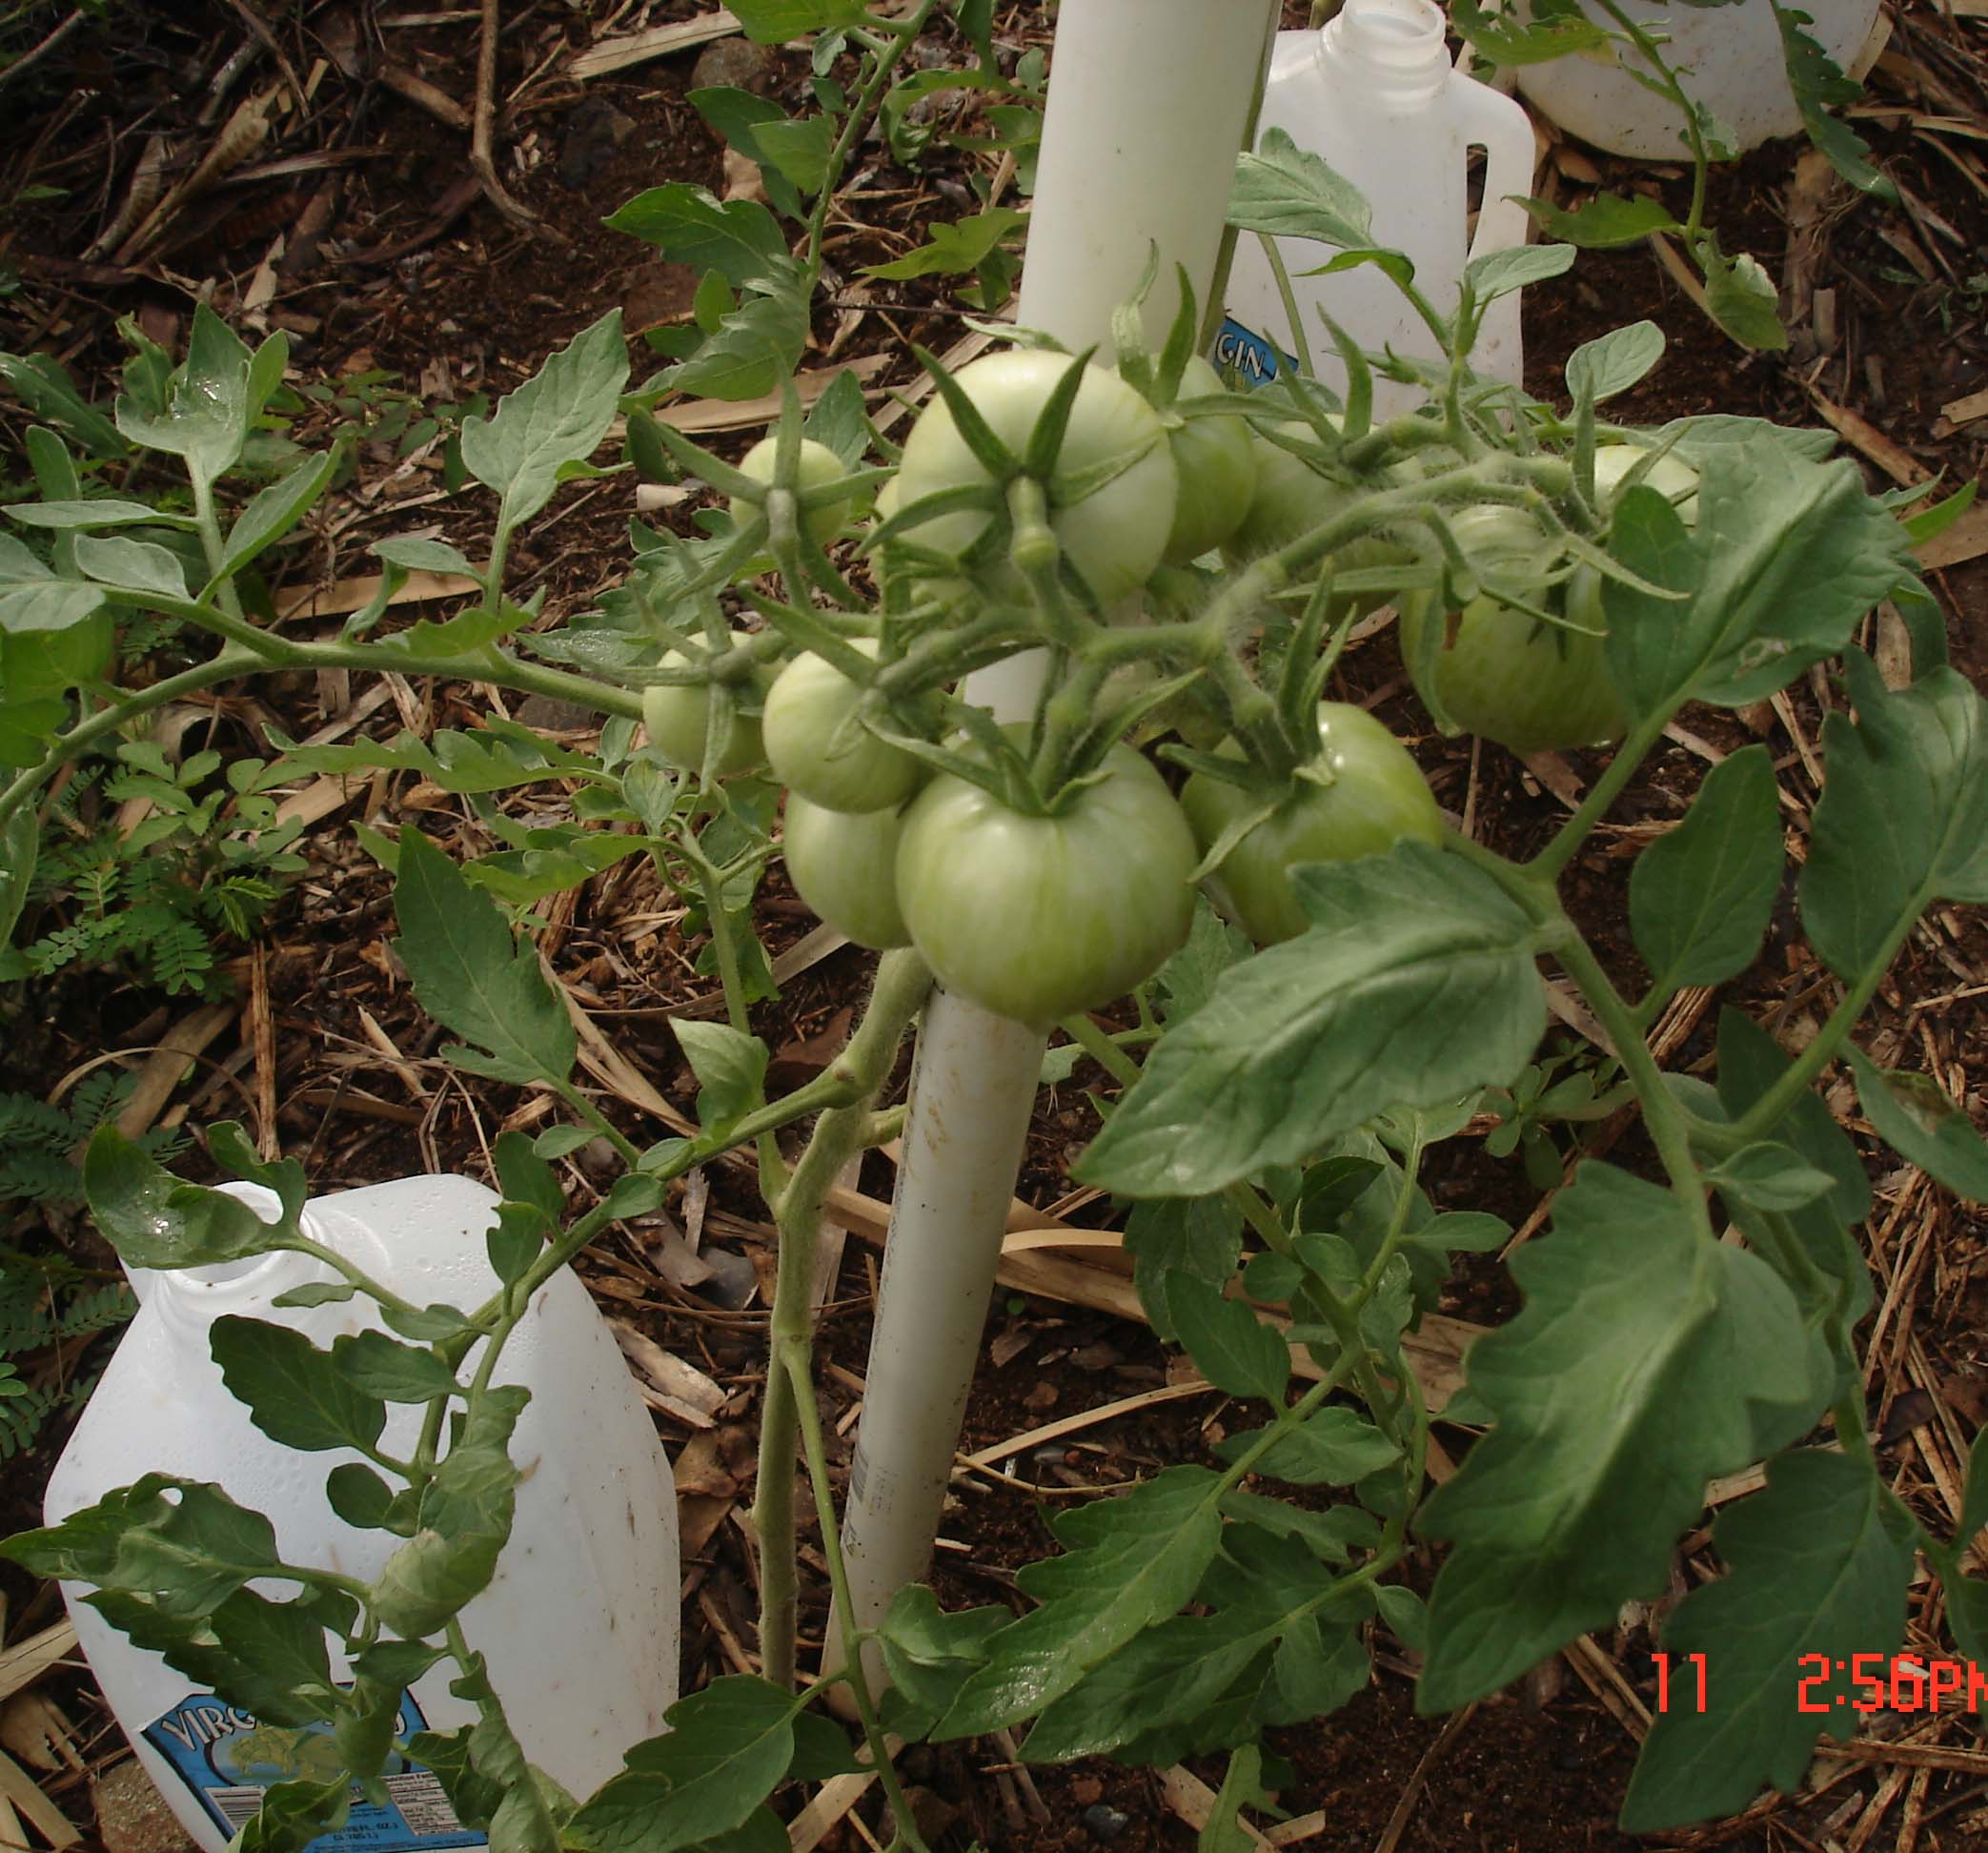 Tomatoes with bottle drop